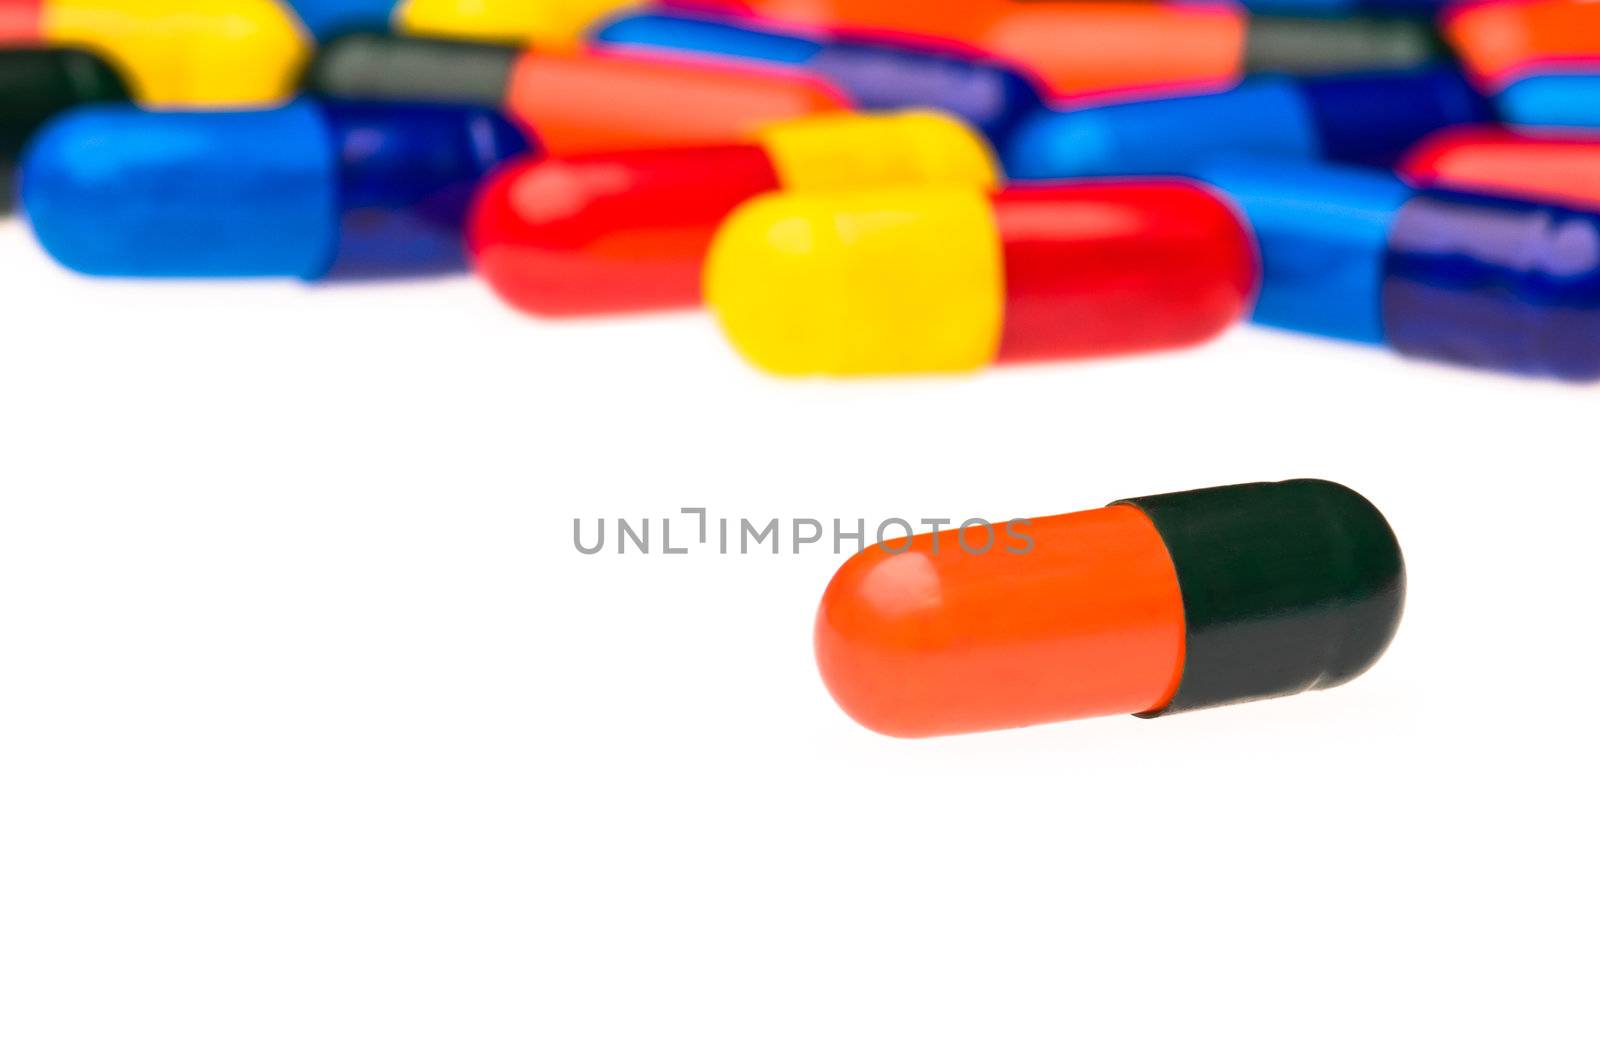 One orange black capsule in front of many colorful, blurry in the background